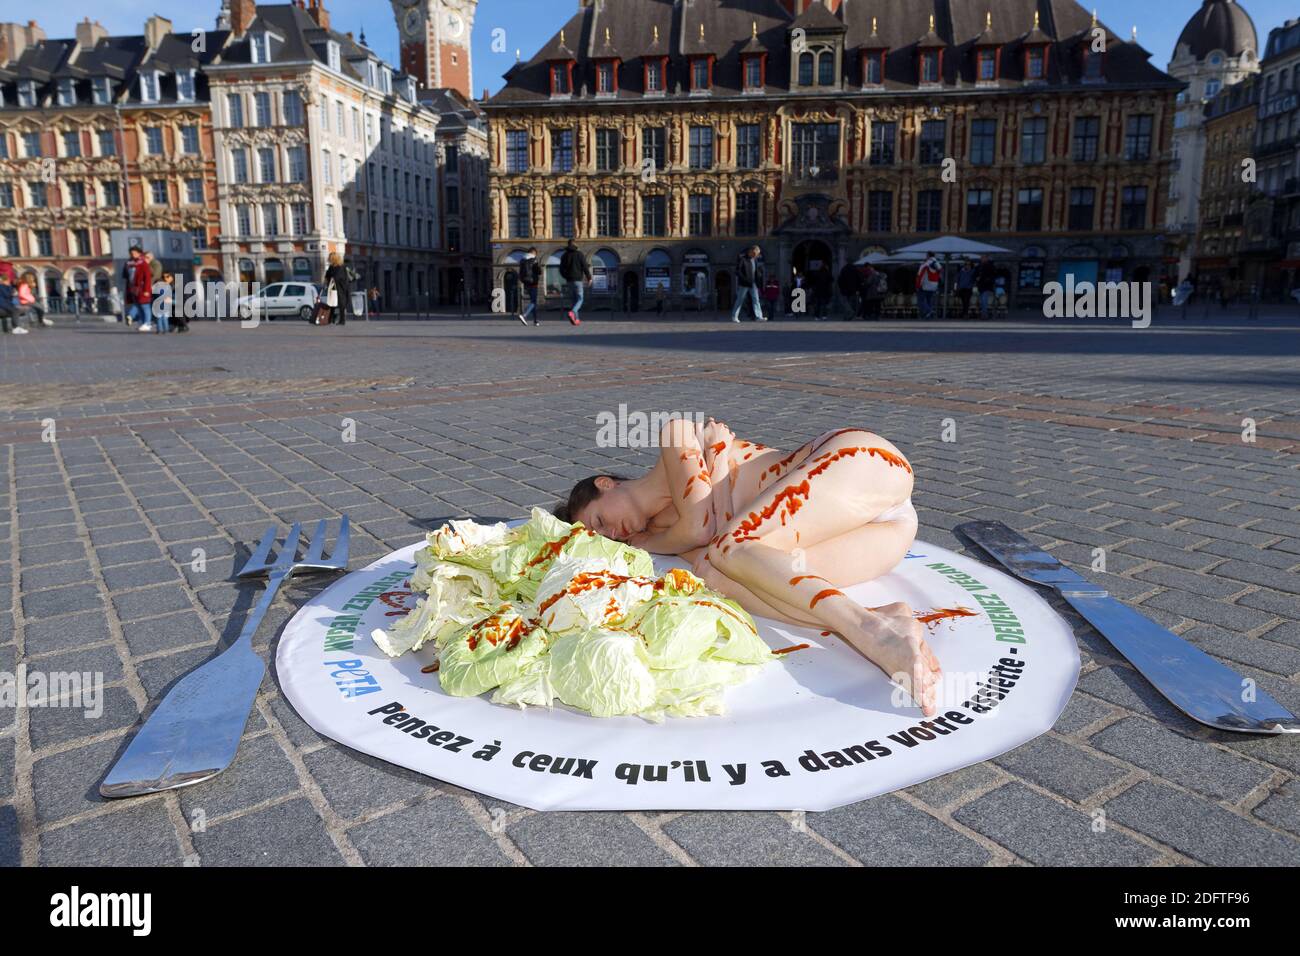 An activist with PETA (People for the Ethical Treatment of Animals) lies  covered with barbecue sauce during a protest against the consumption of  animal products in Lille, France, November 01st, 2018. Photo